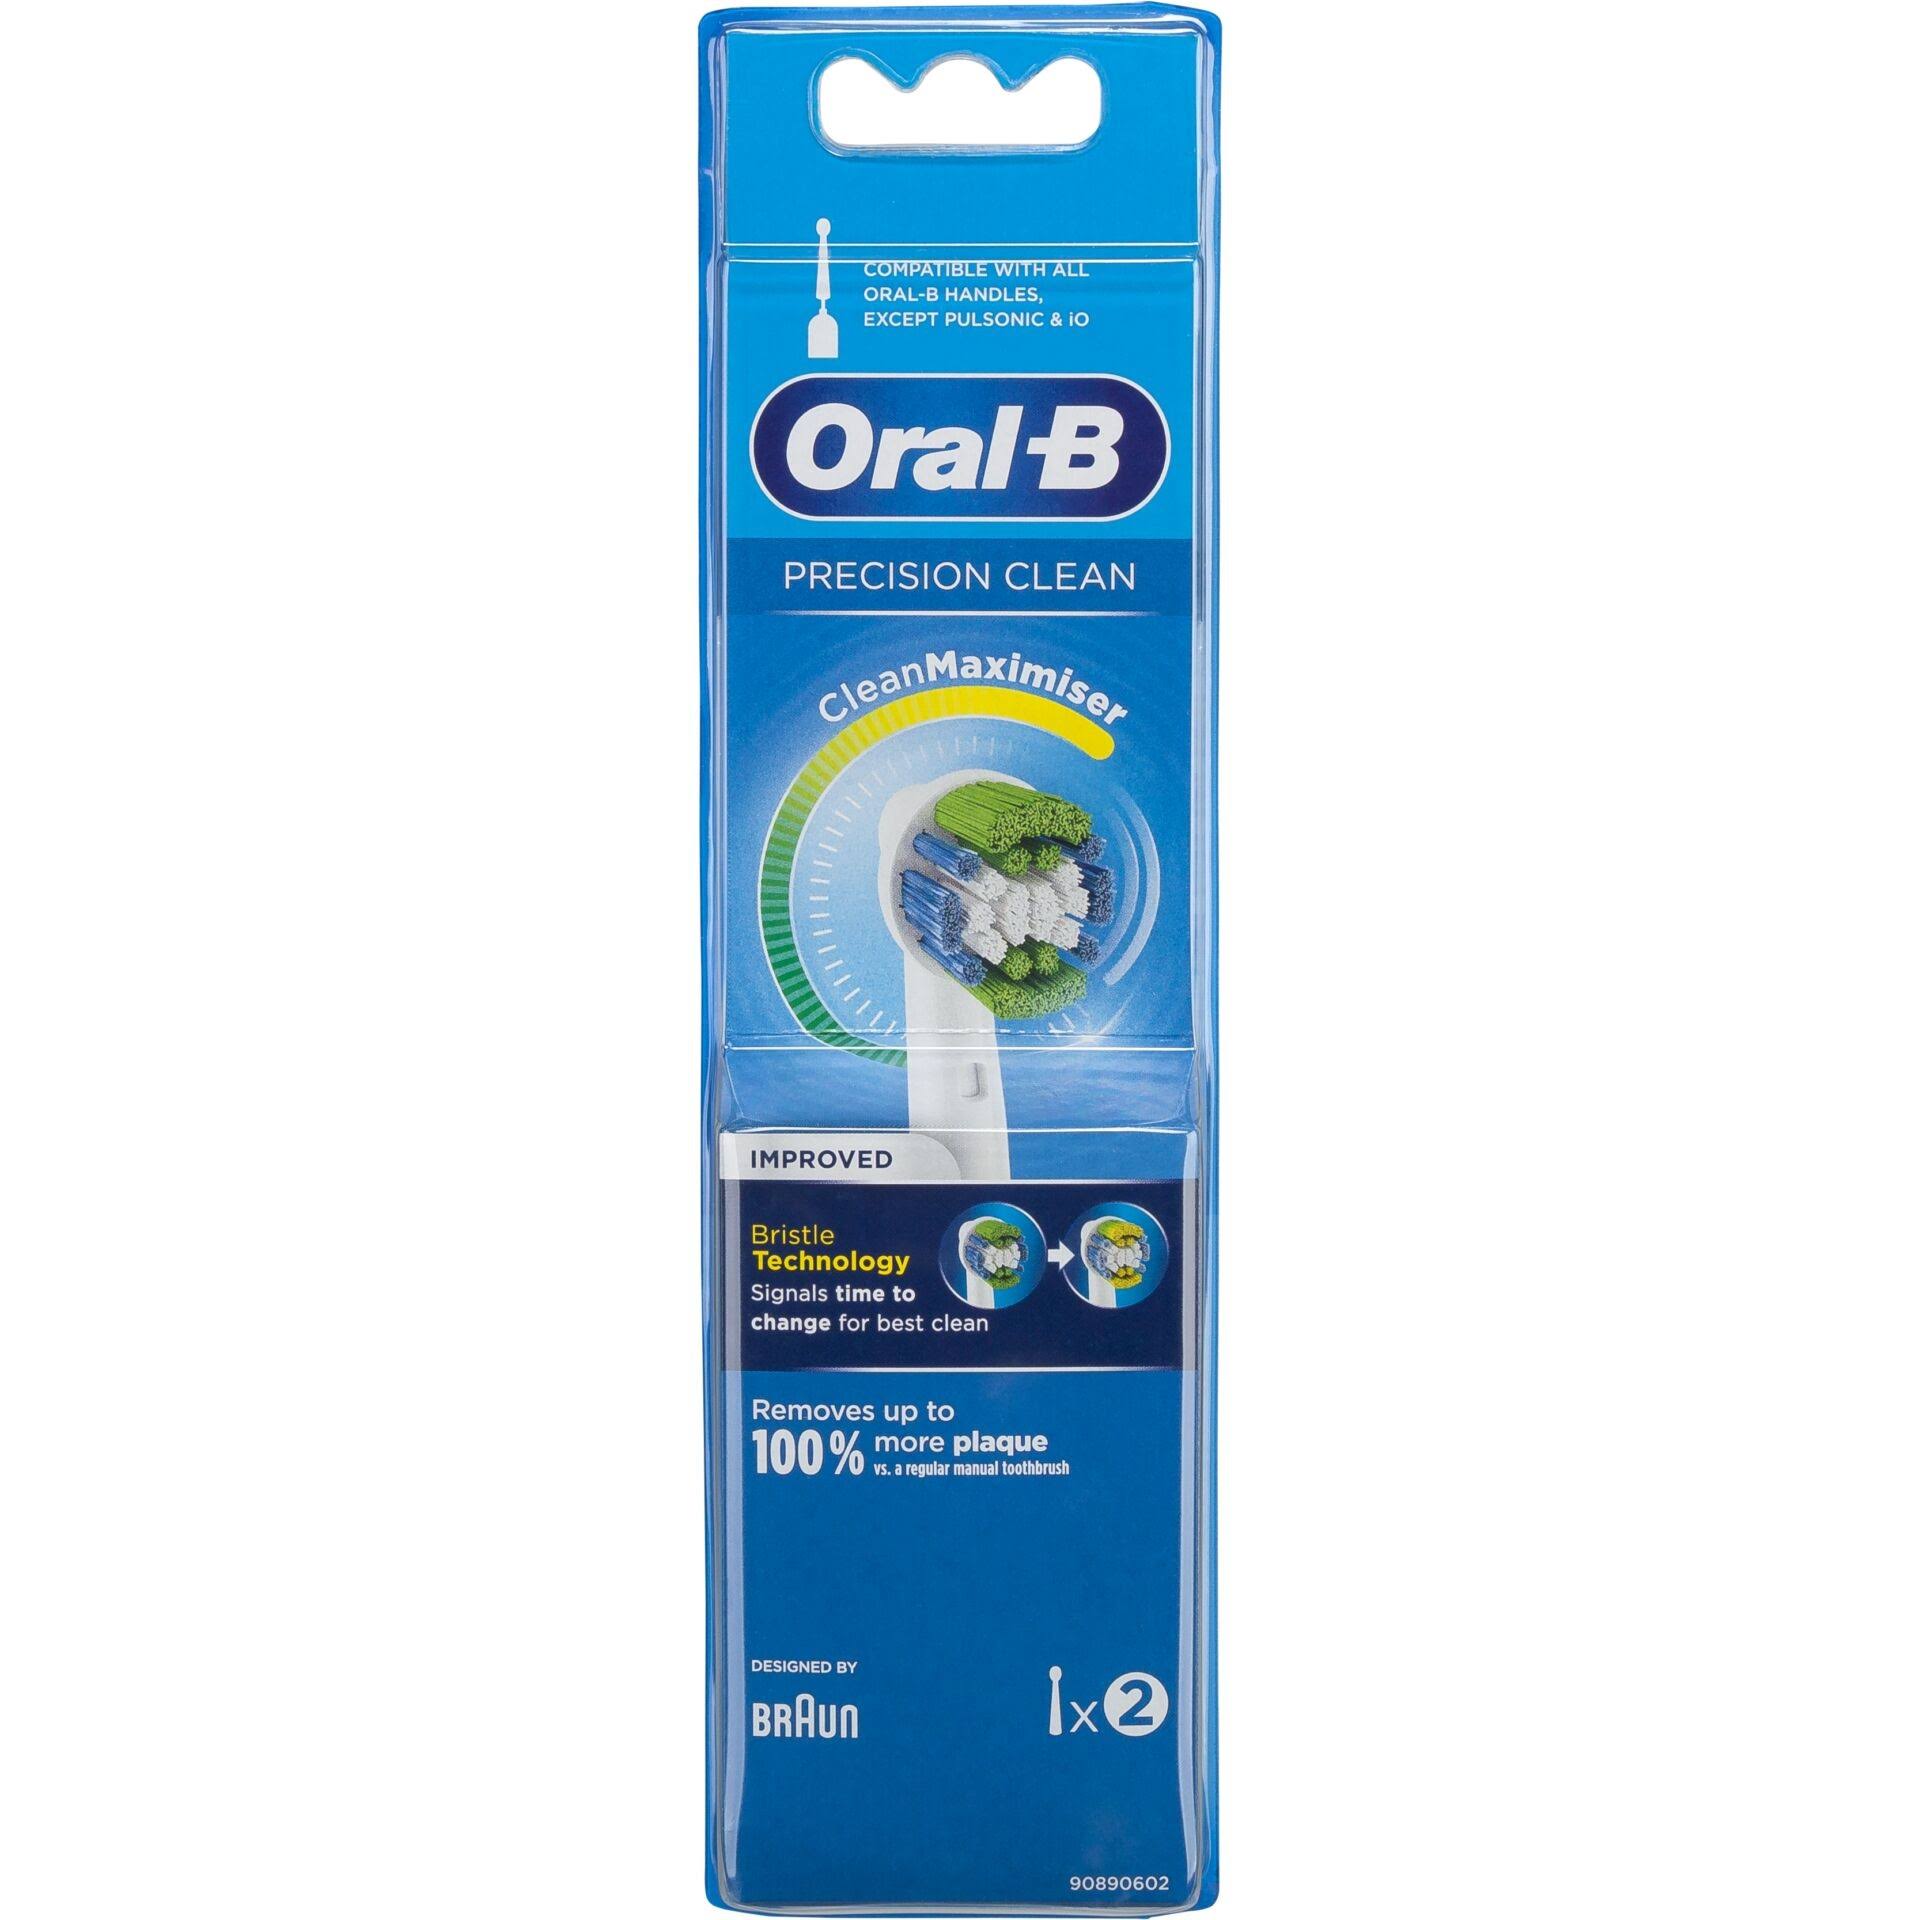 Oral-B Precision Clean Toothbrush Heads, 2 Pack